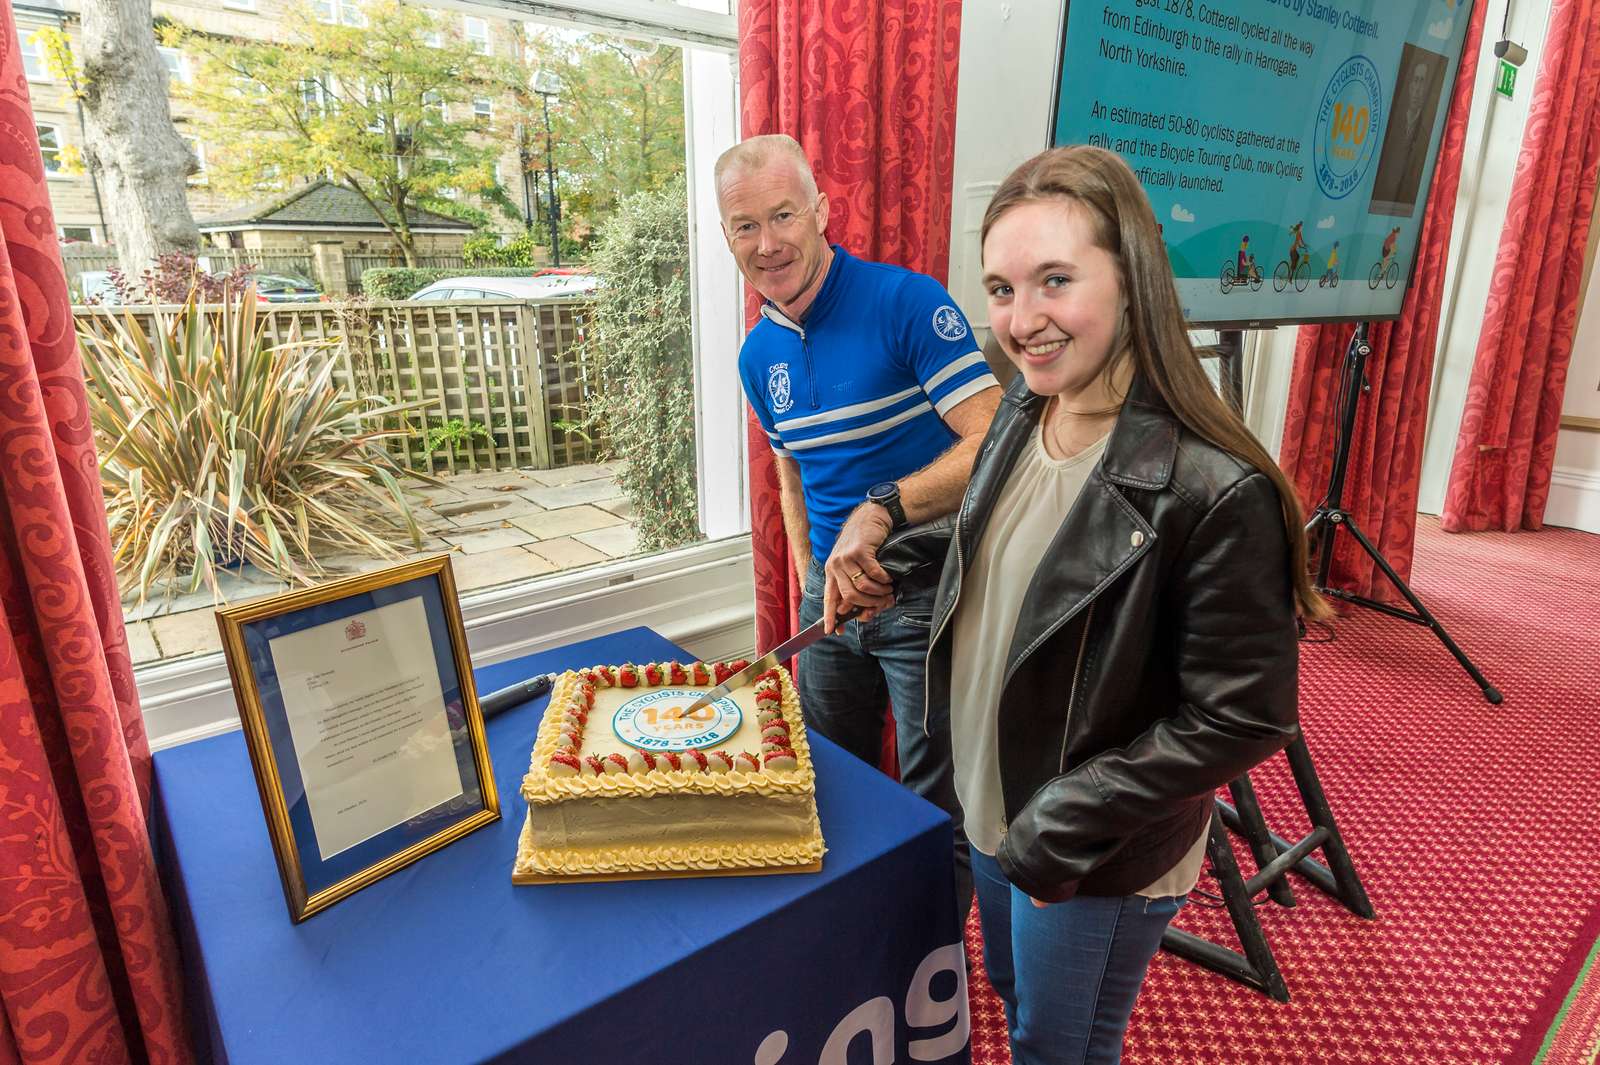 Paul Tuohy and Tourist competition junior winner Sophia Morris cut the birthday cake